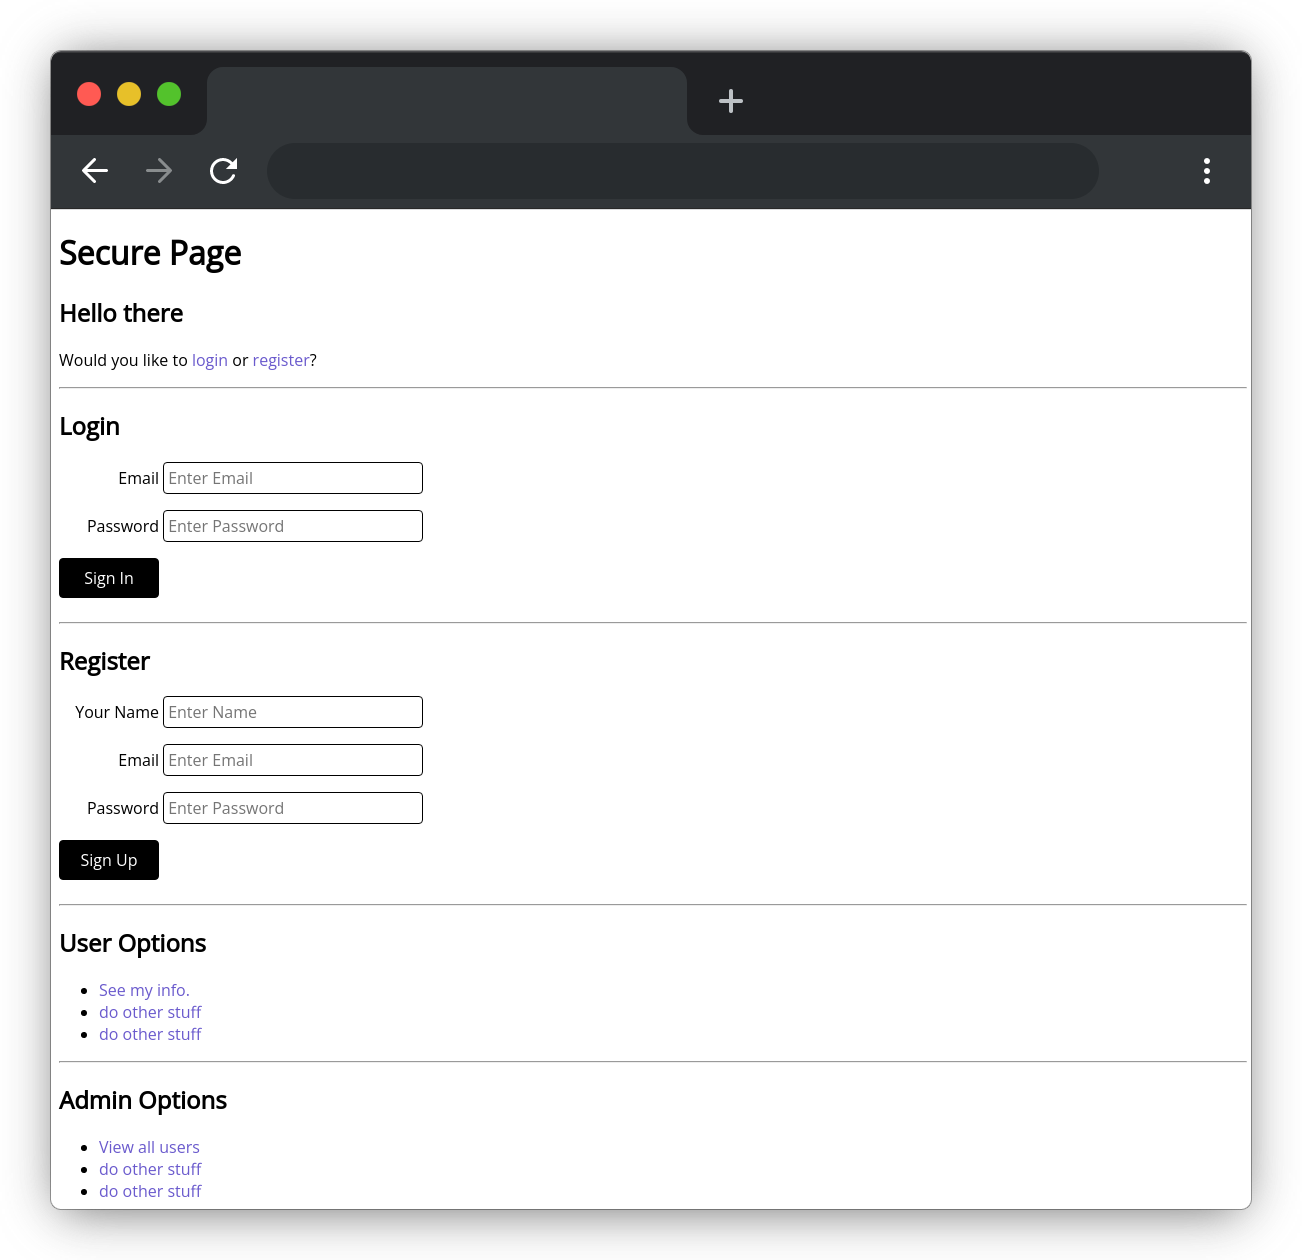 Secure Page